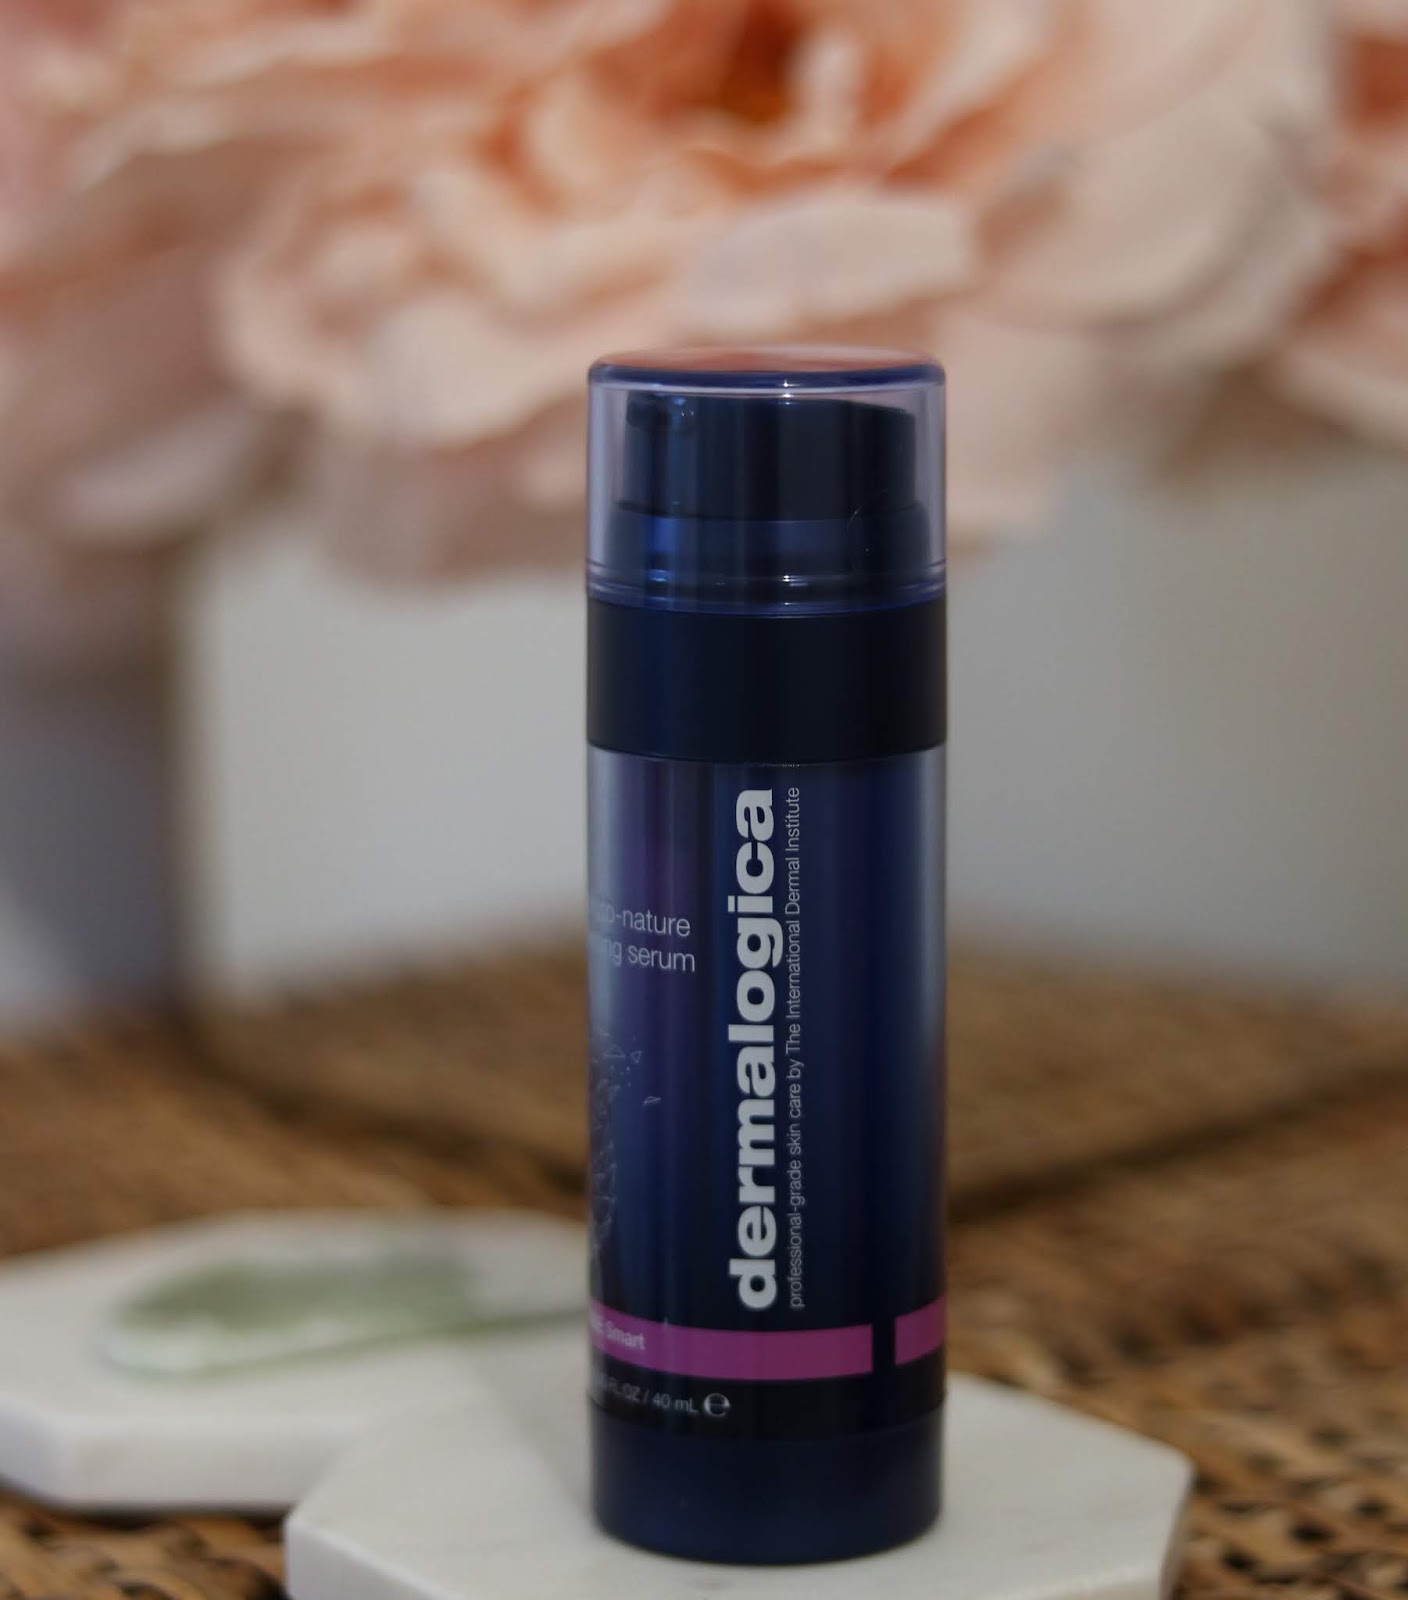 DermalogicaPhyto-Nature Firming Serum: A quick review